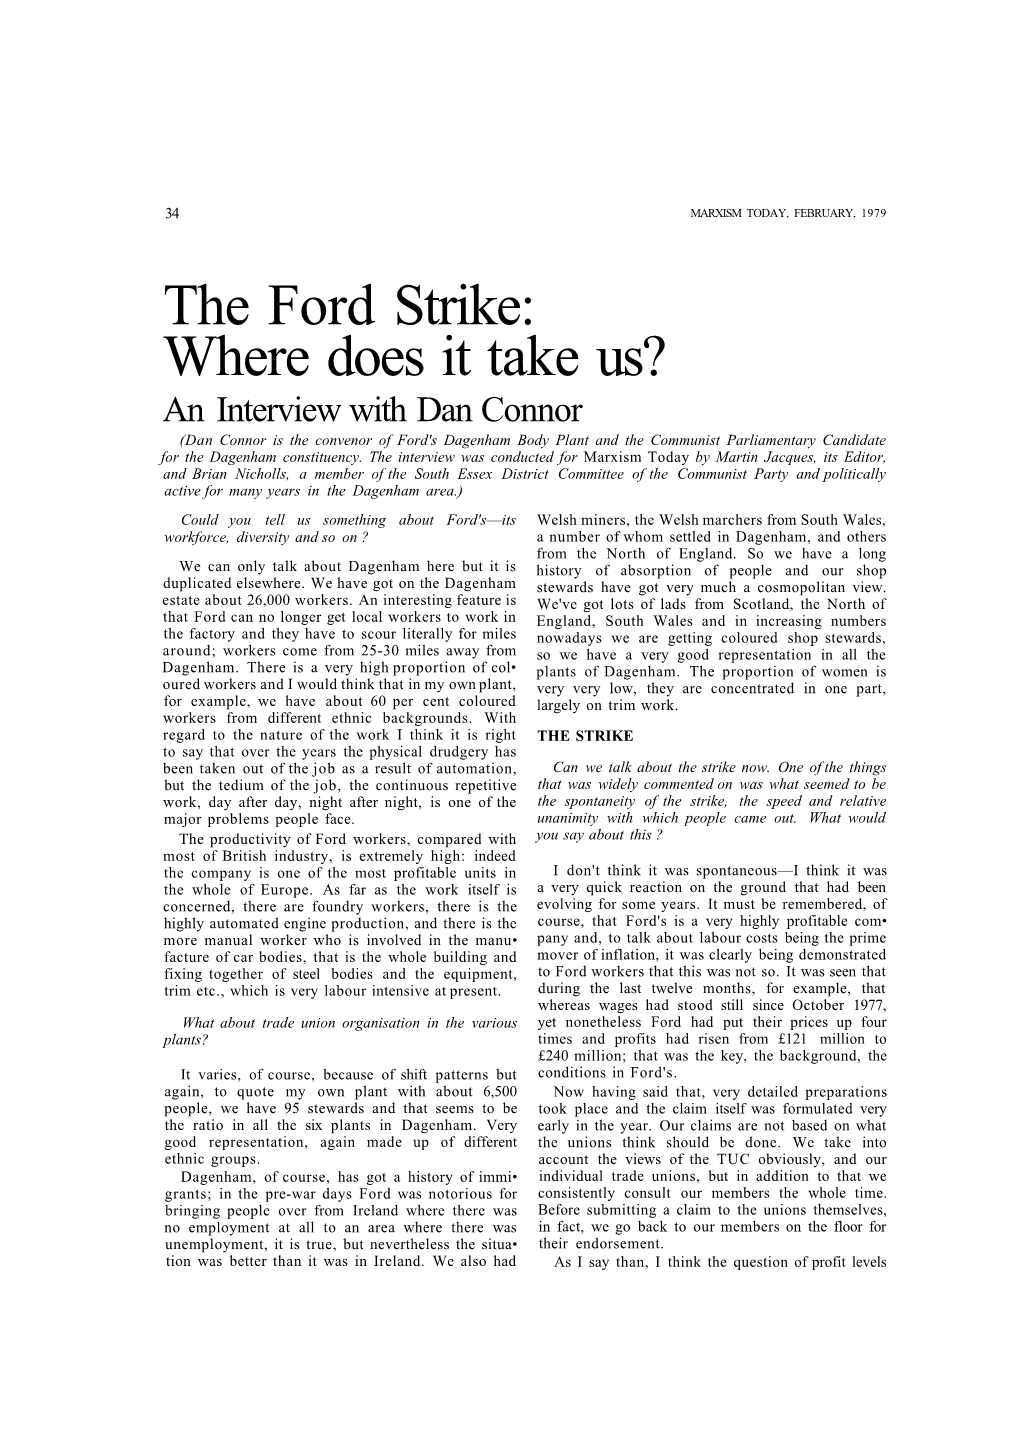 The Ford Strike: Where Does It Take